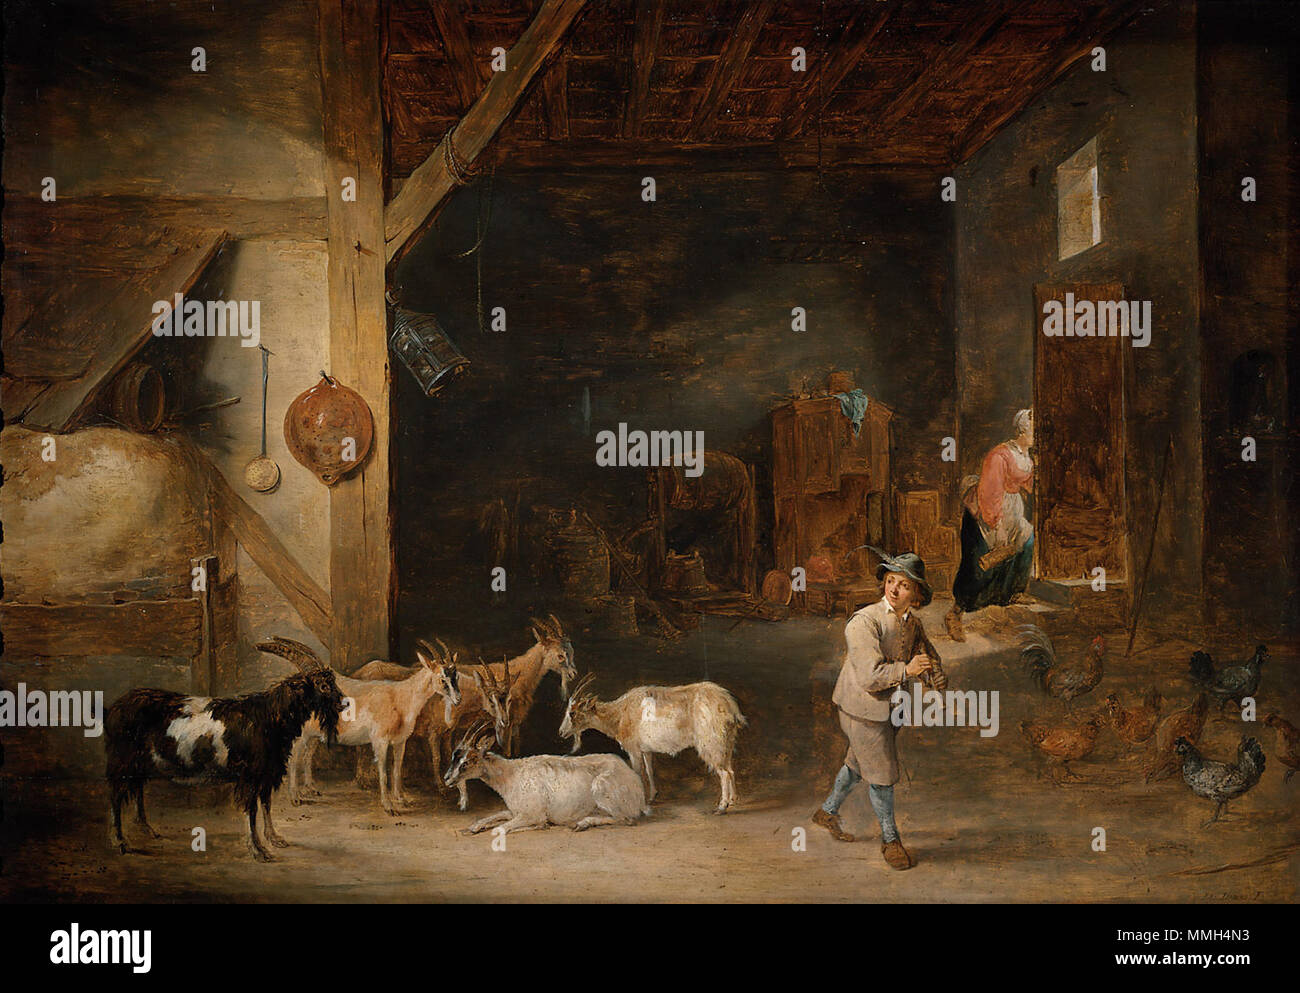 Barn with goats and a boy playing the recorder Goat Barn with Flute-player.  between 1640 and 1645. David Teniers de Jongere07 Stock Photo - Alamy